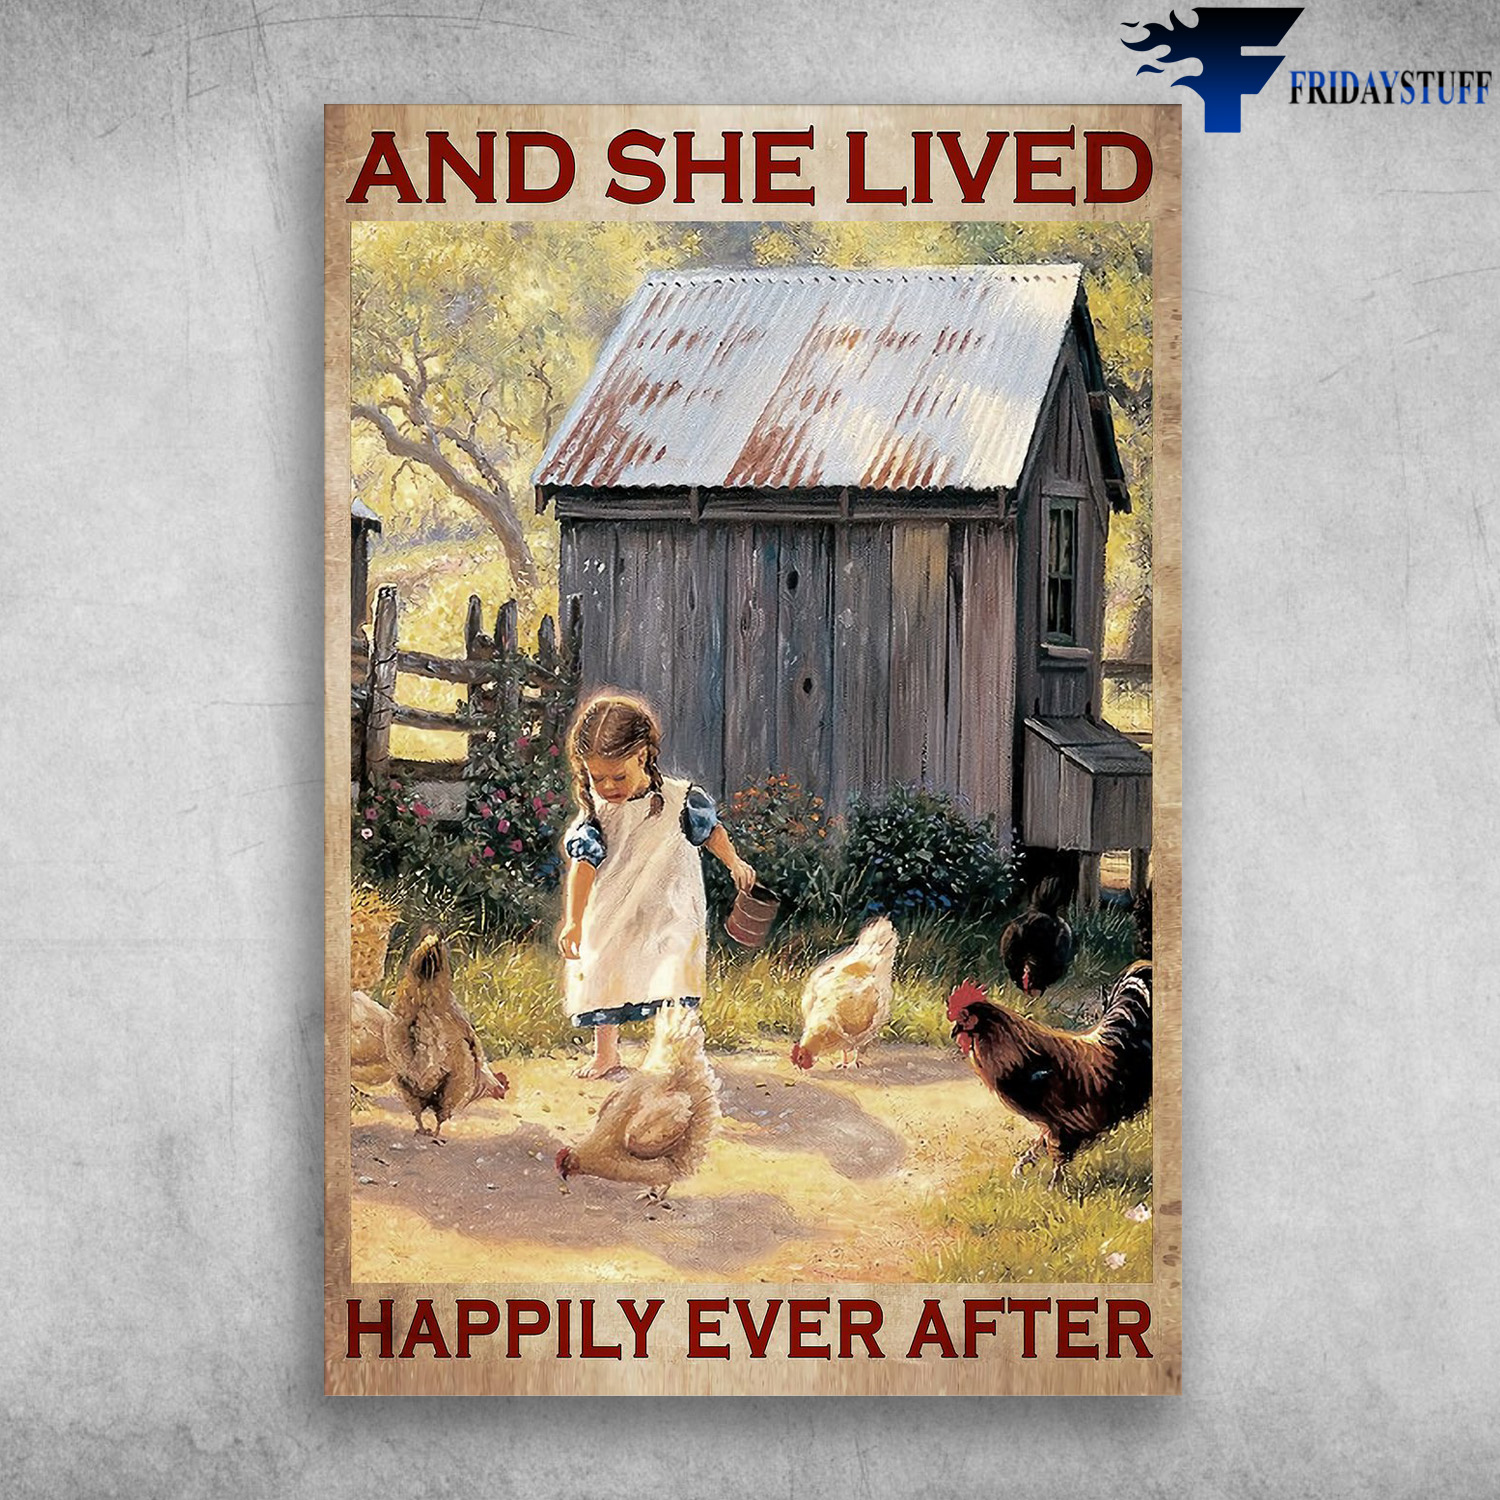 Little Girl And The Chickens - And She Lived, Happily Ever After